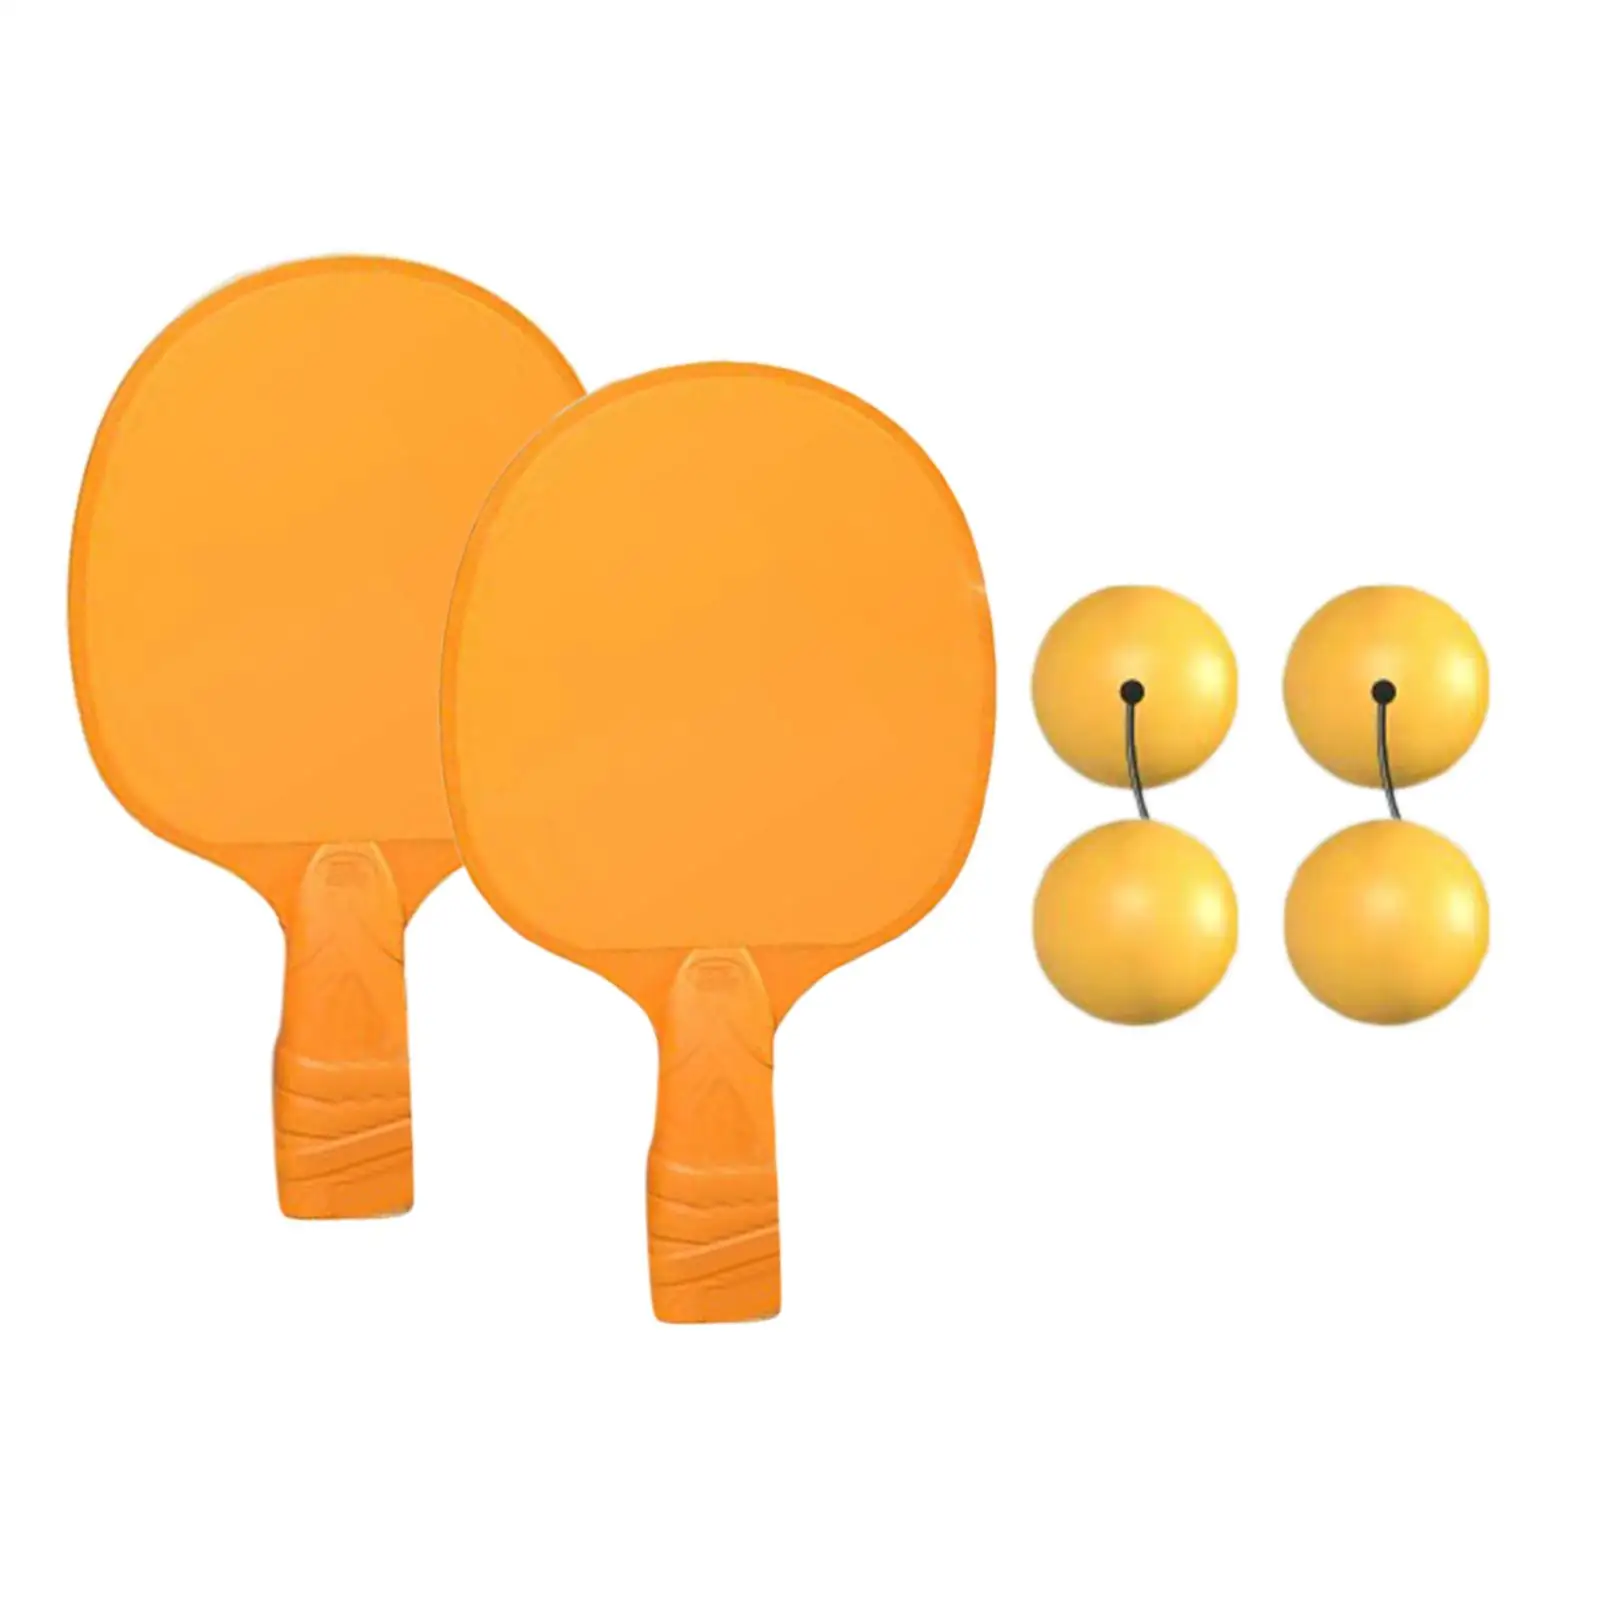 Hanging Pong Trainer Portable Personal Coach Elastic Set for Sports